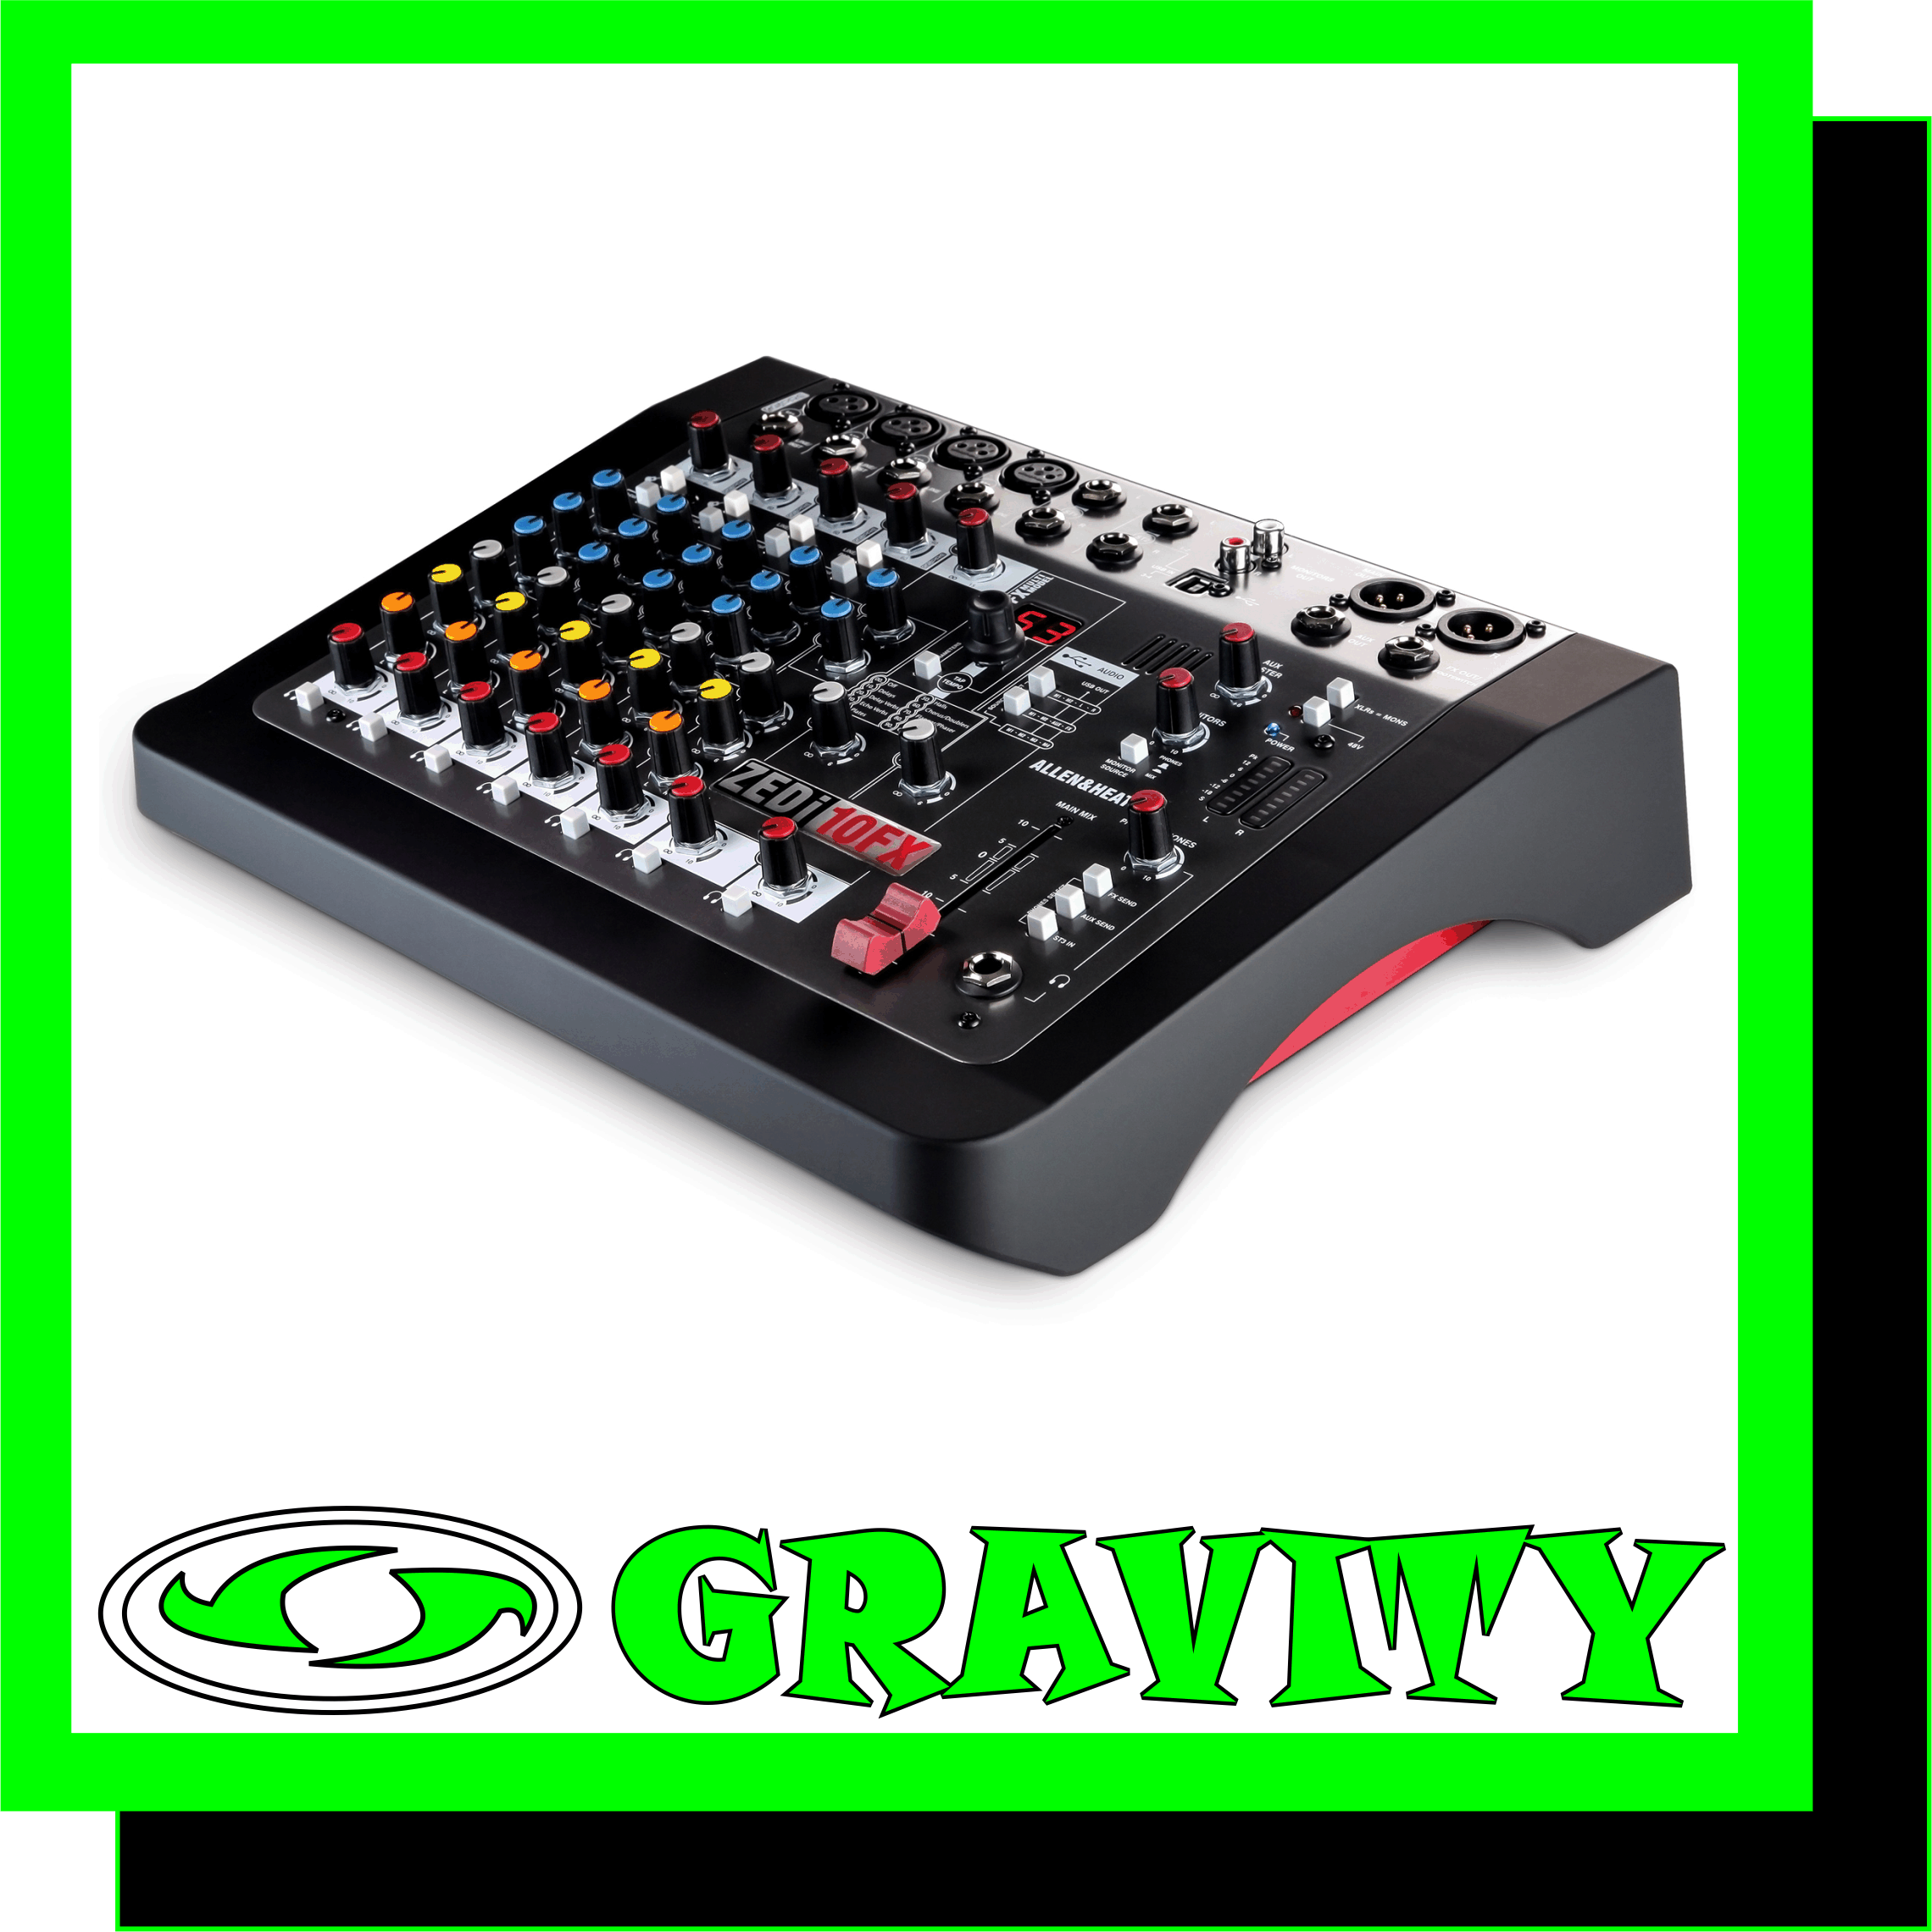 ZEDi-10FX Hybrid compact mixer / 4×4 USB interface with FX  Product Features: -4 in, 4 out USB Audio Interface (24-bit/96kHz) -Cubase LE Software included -Cubasis LE App included -4 Mic / Line Inputs with separate XLR and TRS jack sockets -2 Stereo Inputs with TRS jack sockets -2 Guitar DI high impedance inputs, eliminating the need for DI boxes -Internal FX Engine with Tap Tempo -Lo-cut filter for cleaning up unwanted low frequency noise -3 band EQ for easy creative and corrective tonal shaping -Aux out for connecting a monitor speaker or in-ear / headphone monitoring -60mm smooth travel fader on main mix -XLR main outputs -Flexible signal monitoring -8 LED signal metering -48V Phantom Power for condenser mics -Robust internal power supply  ZEDi-10FX combines the robustness and hands-on control of an analogue mixer with a high quality 4 x 4 USB interface and an outstanding multi-model FX unit, making it a perfect all-round choice for musicians, recording artists and venues. Whether it’s bouncing ideas around at home, performing live or recording tracks to share on YouTube and Soundcloud, ZEDi-10FX is a versatile companion for every step of the creative journey.  The studio quality, 24-bit / 96kHz, 4×4 USB interface makes it easy to capture stunning multitrack recordings direct from the mixer to a Mac or PC without the need for any extra equipment. Featuring the new GSPre boutique preamp design, developed from the revered GS-R24 studio recording console, the ZED boasts exceptionally low noise and massive headroom, with a signature analogue warmth and depth. ZEDi-10FX includes a specially created suite of studio quality reverbs, delays and special multi-model FX, crafted by Allen & Heath’s acclaimed in-house effects aficionados. Guitarists will be pleased to know that two of ZEDi-10FX’s mono channels feature Guitar DI high impedance inputs, allowing guitars to be plugged straight into the mixer without the hassle and expense of carrying separate DI boxes.